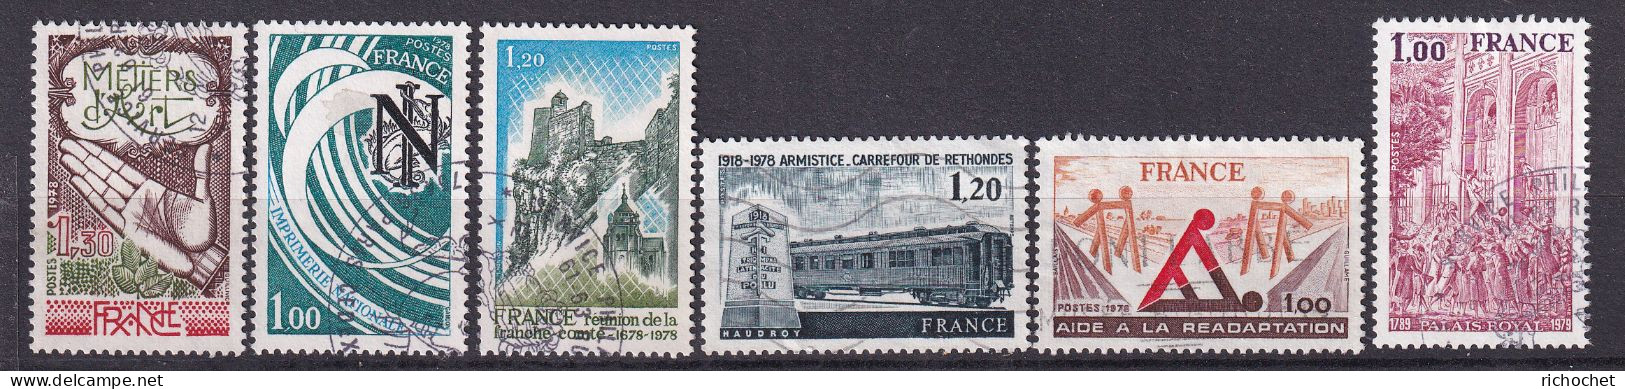 France 2013 + 2014 + 2015 + 2022 + 2023 + 2049 ° - Used Stamps